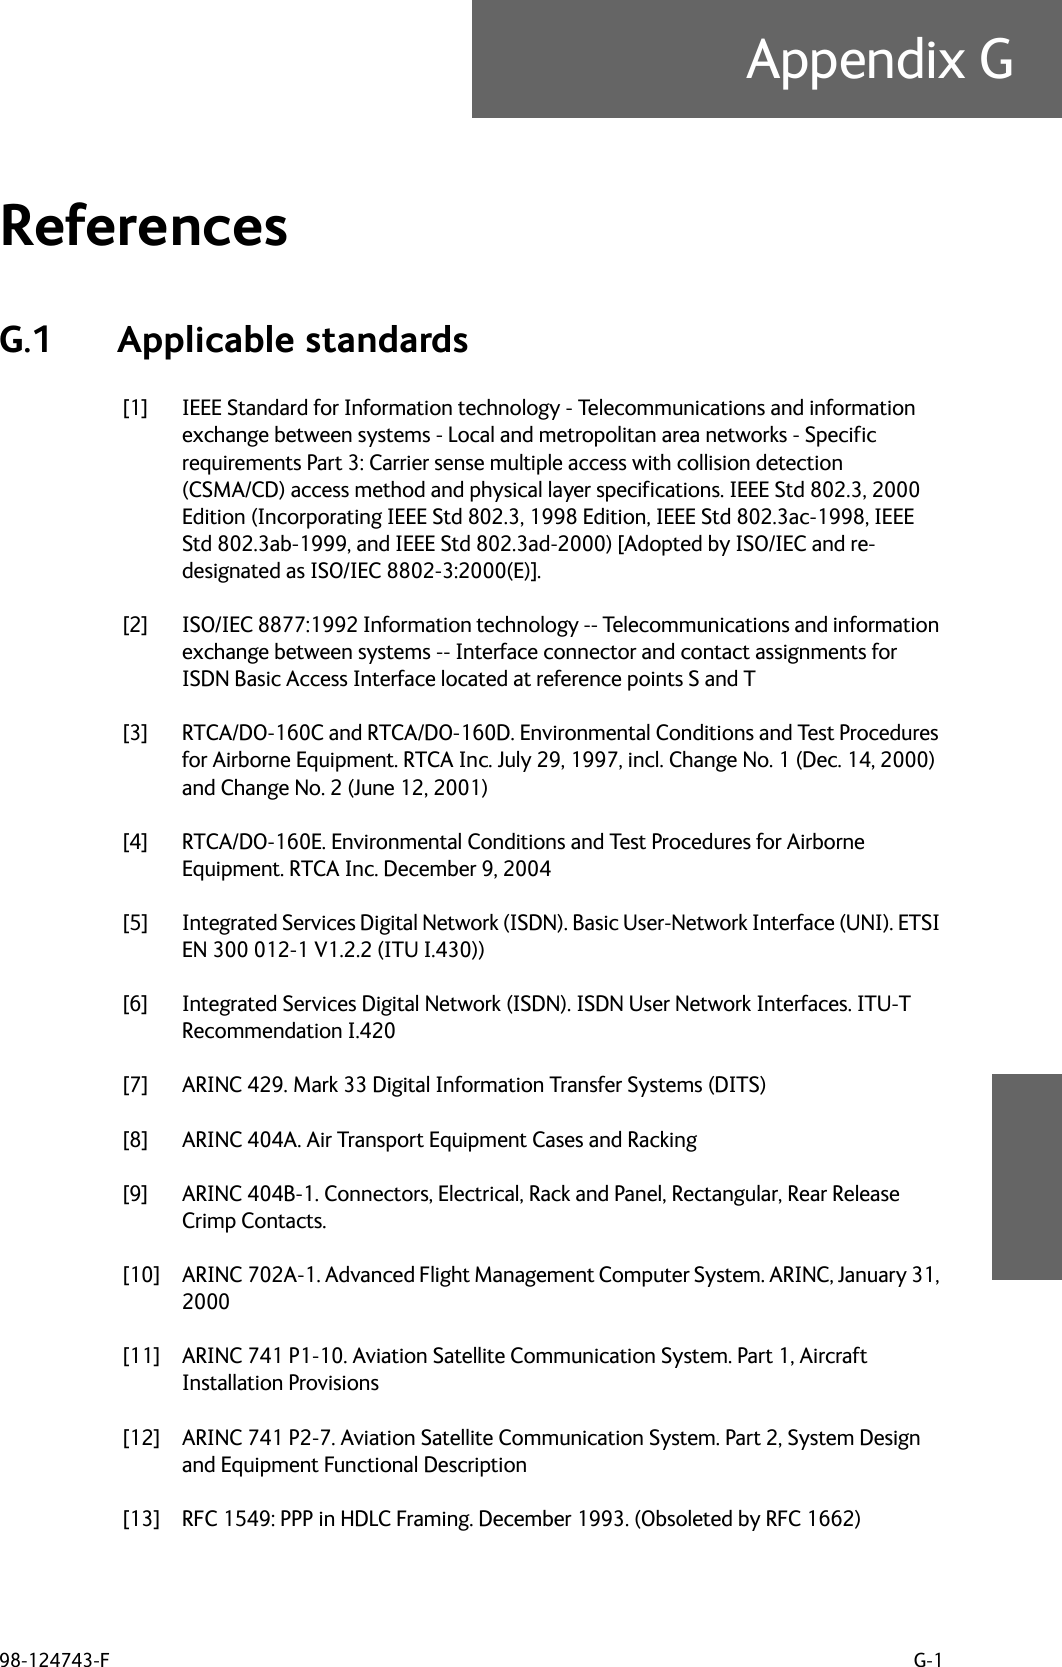 98-124743-F G-1Appendix GReferences GG.1 Applicable standards[1] IEEE Standard for Information technology - Telecommunications and information exchange between systems - Local and metropolitan area networks - Specific requirements Part 3: Carrier sense multiple access with collision detection (CSMA/CD) access method and physical layer specifications. IEEE Std 802.3, 2000 Edition (Incorporating IEEE Std 802.3, 1998 Edition, IEEE Std 802.3ac-1998, IEEE Std 802.3ab-1999, and IEEE Std 802.3ad-2000) [Adopted by ISO/IEC and re-designated as ISO/IEC 8802-3:2000(E)].[2] ISO/IEC 8877:1992 Information technology -- Telecommunications and information exchange between systems -- Interface connector and contact assignments for ISDN Basic Access Interface located at reference points S and T[3] RTCA/DO-160C and RTCA/DO-160D. Environmental Conditions and Test Procedures for Airborne Equipment. RTCA Inc. July 29, 1997, incl. Change No. 1 (Dec. 14, 2000) and Change No. 2 (June 12, 2001)[4] RTCA/DO-160E. Environmental Conditions and Test Procedures for Airborne Equipment. RTCA Inc. December 9, 2004[5] Integrated Services Digital Network (ISDN). Basic User-Network Interface (UNI). ETSI EN 300 012-1 V1.2.2 (ITU I.430))[6] Integrated Services Digital Network (ISDN). ISDN User Network Interfaces. ITU-T Recommendation I.420[7] ARINC 429. Mark 33 Digital Information Transfer Systems (DITS)[8] ARINC 404A. Air Transport Equipment Cases and Racking[9] ARINC 404B-1. Connectors, Electrical, Rack and Panel, Rectangular, Rear Release Crimp Contacts.[10] ARINC 702A-1. Advanced Flight Management Computer System. ARINC, January 31, 2000[11] ARINC 741 P1-10. Aviation Satellite Communication System. Part 1, Aircraft Installation Provisions[12] ARINC 741 P2-7. Aviation Satellite Communication System. Part 2, System Design and Equipment Functional Description[13] RFC 1549: PPP in HDLC Framing. December 1993. (Obsoleted by RFC 1662)